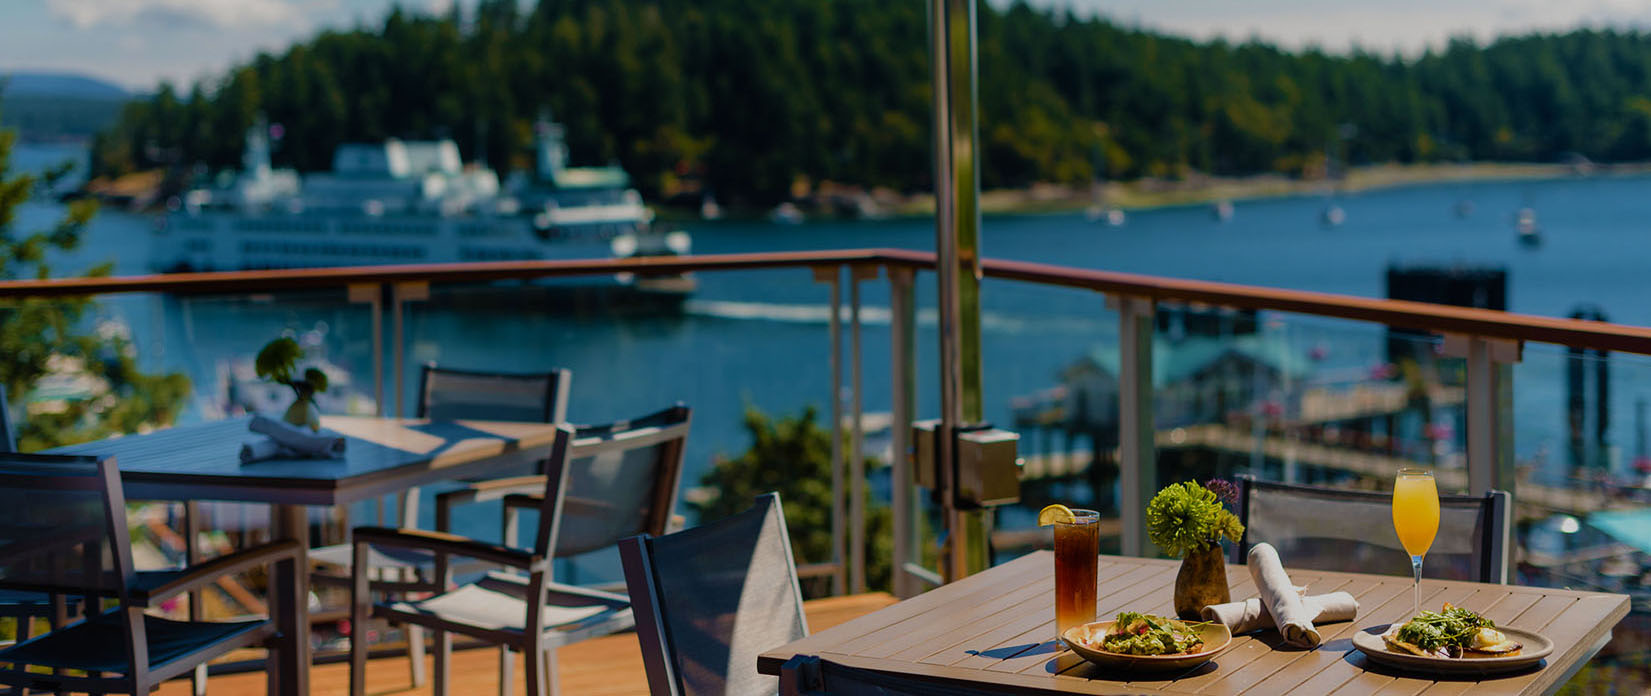 Outdoor dining with harbor view